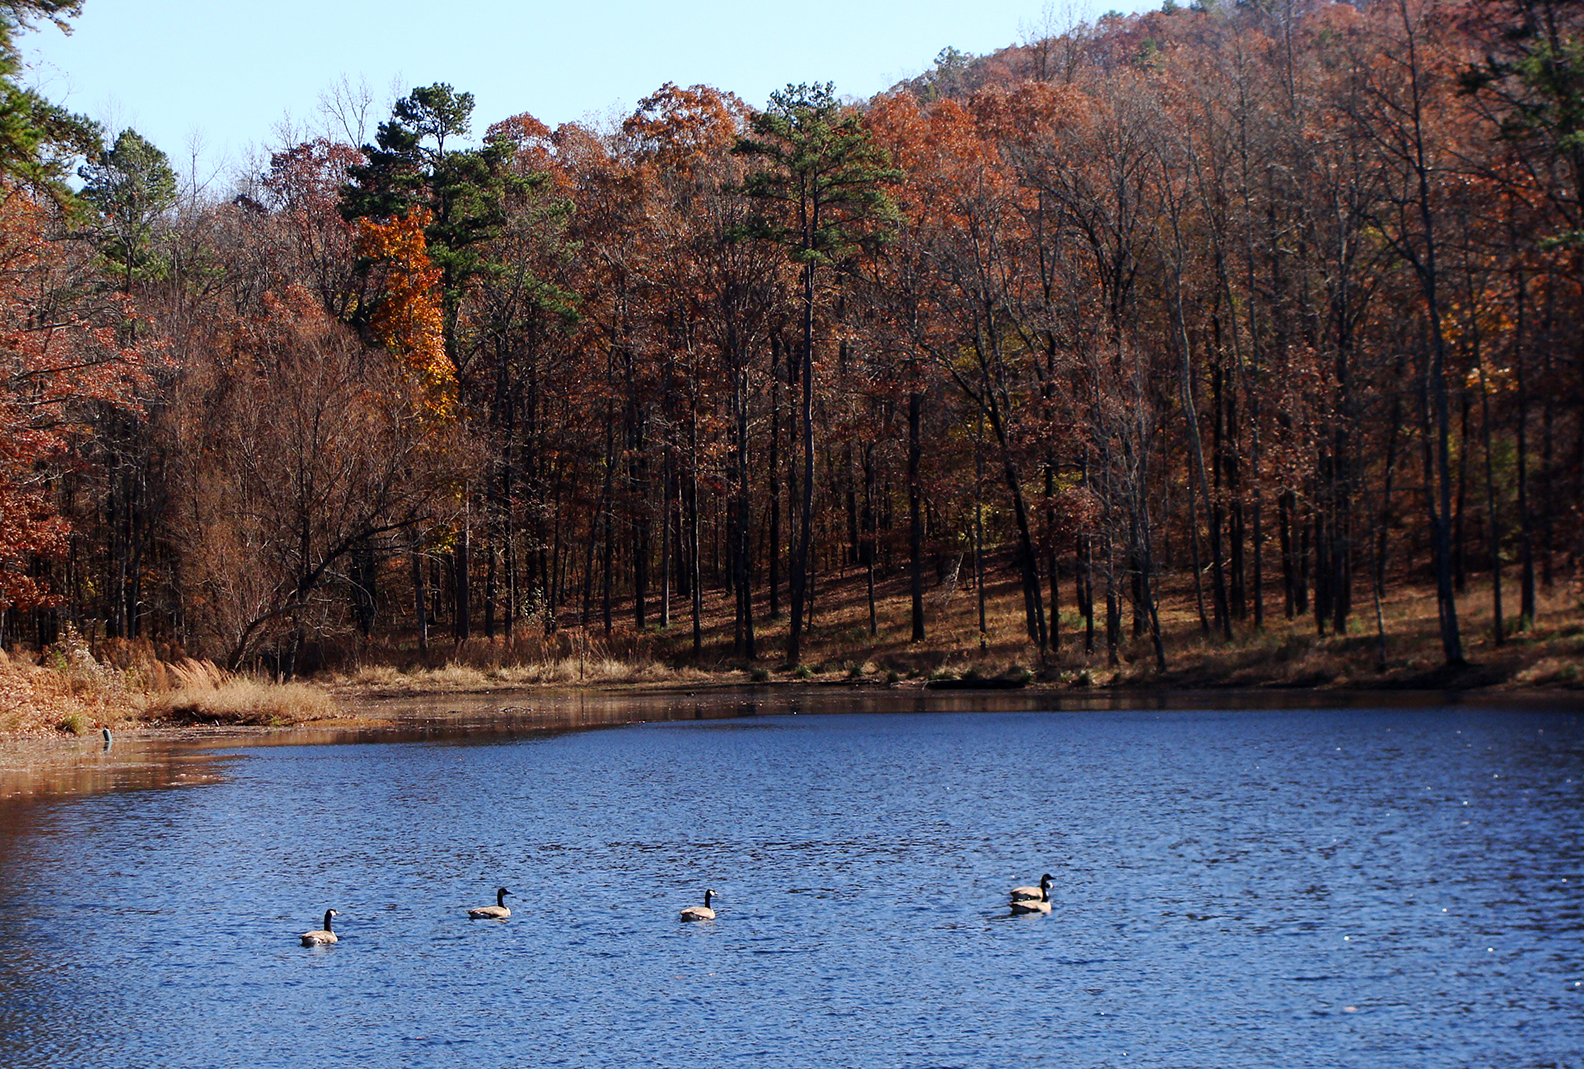 Geese in pond in fall